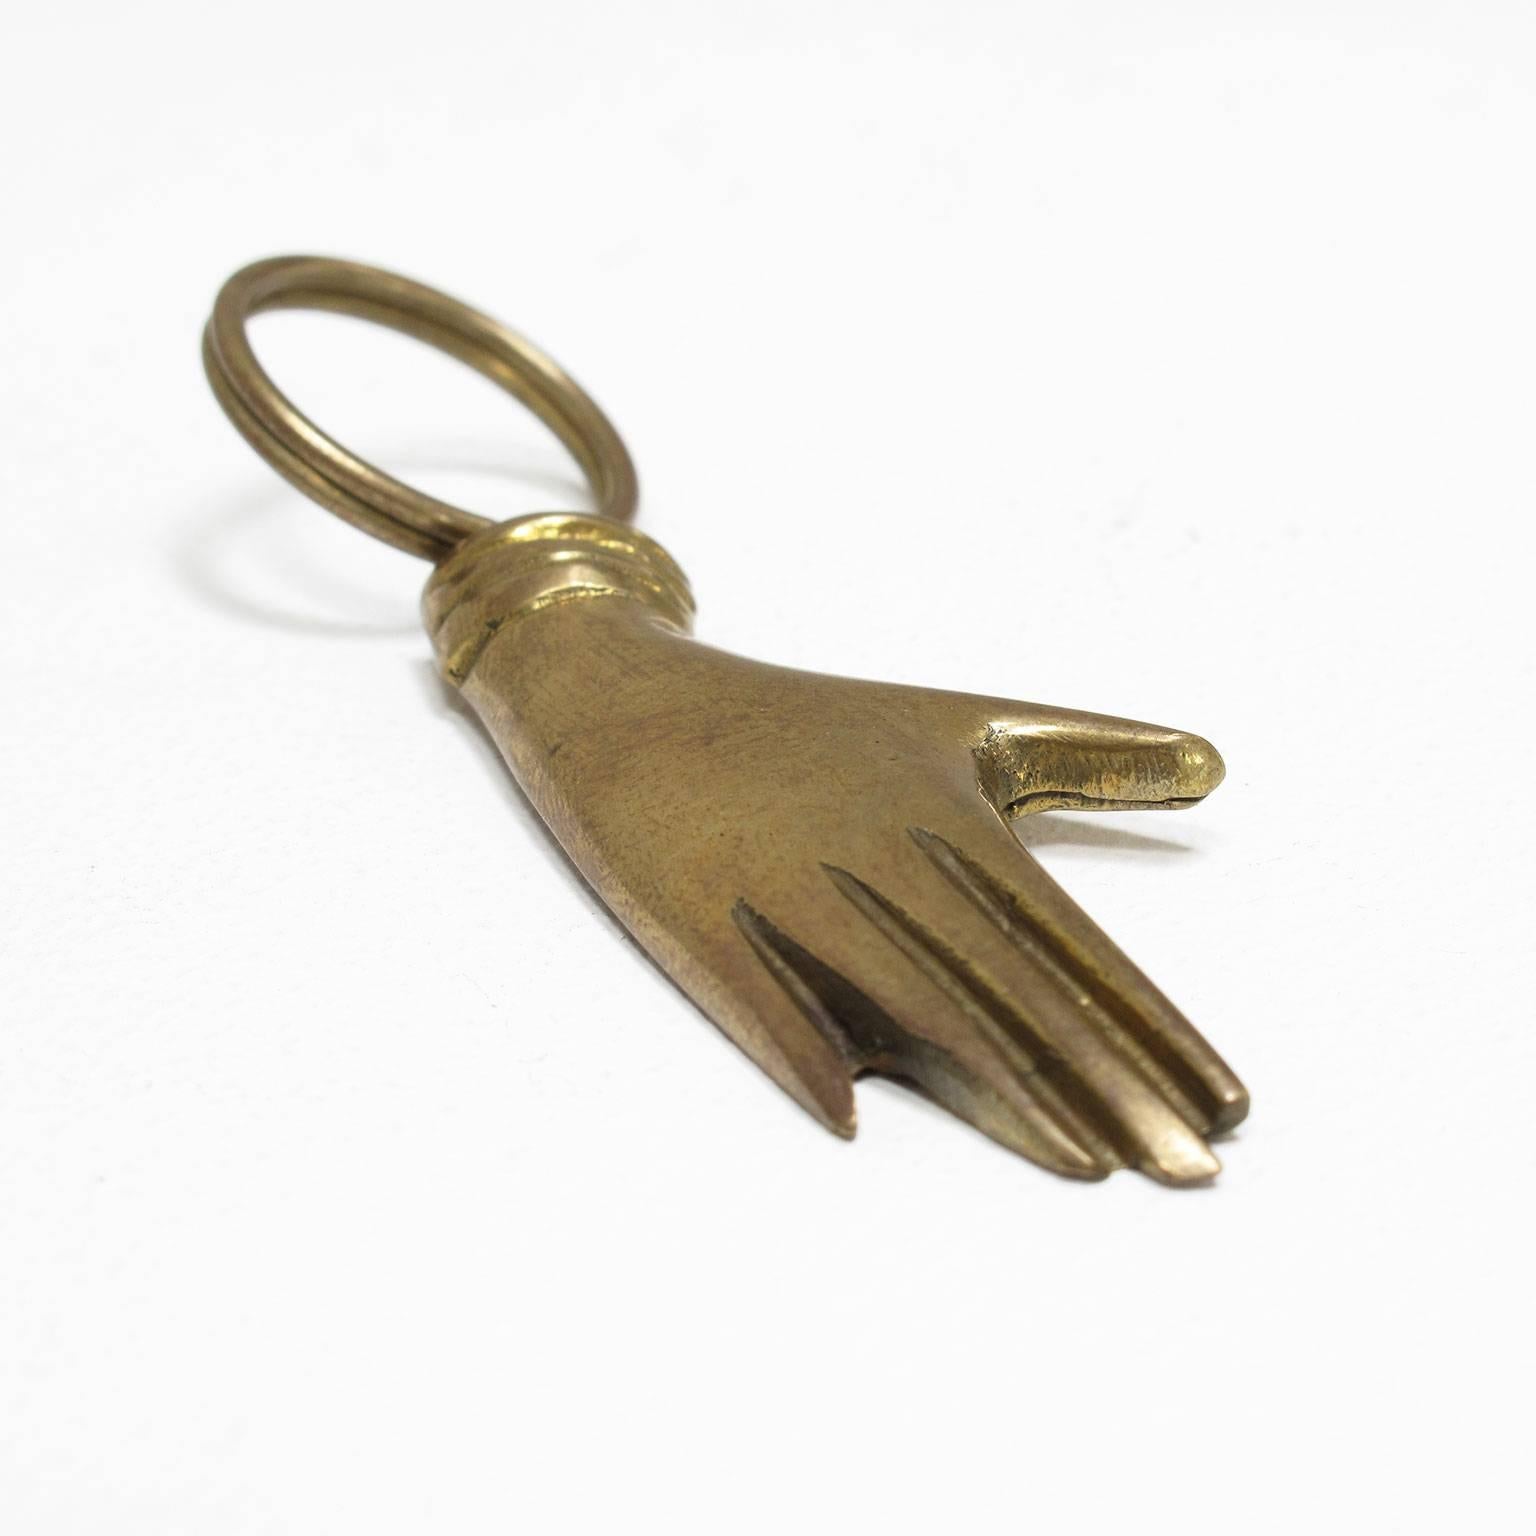 Carl Auböck
Keyring, decorative and functional solid brass object finely crafted in the form of a human hand, originally designed in 1950 and reproduced in 2000 at the Werkstätte Auböck in Austria

Measurements of hand in inches: 1/4 high x 2